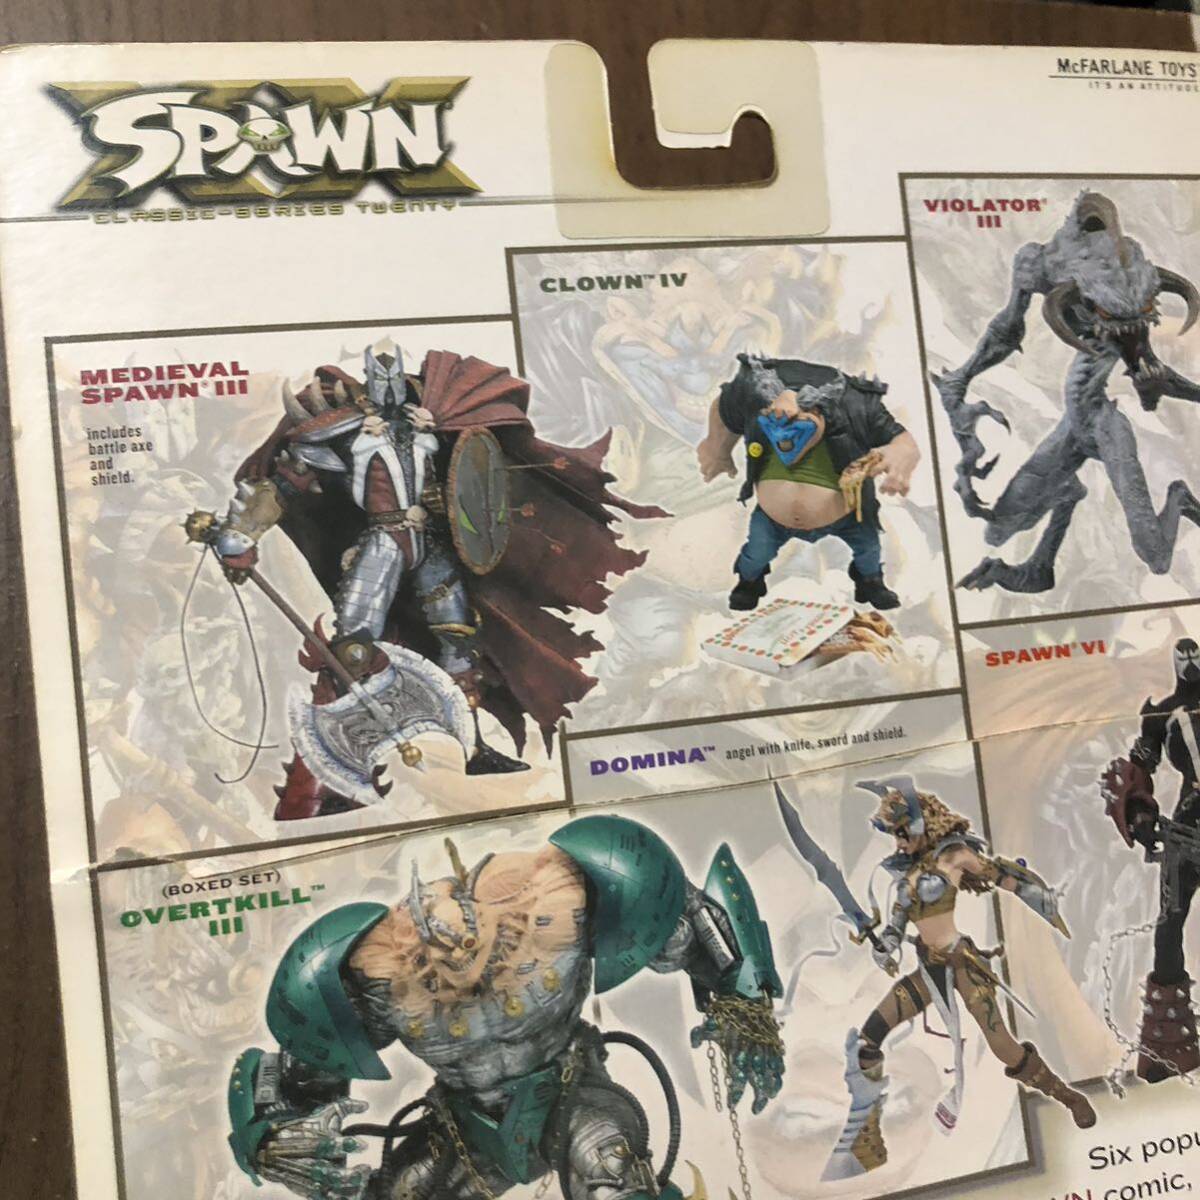 Spawn VI Classic Series 20 Masked フィギュア McFarlane Toys Action Figure マクファーレントイズ スポーン 箱付き アメコミ_画像6